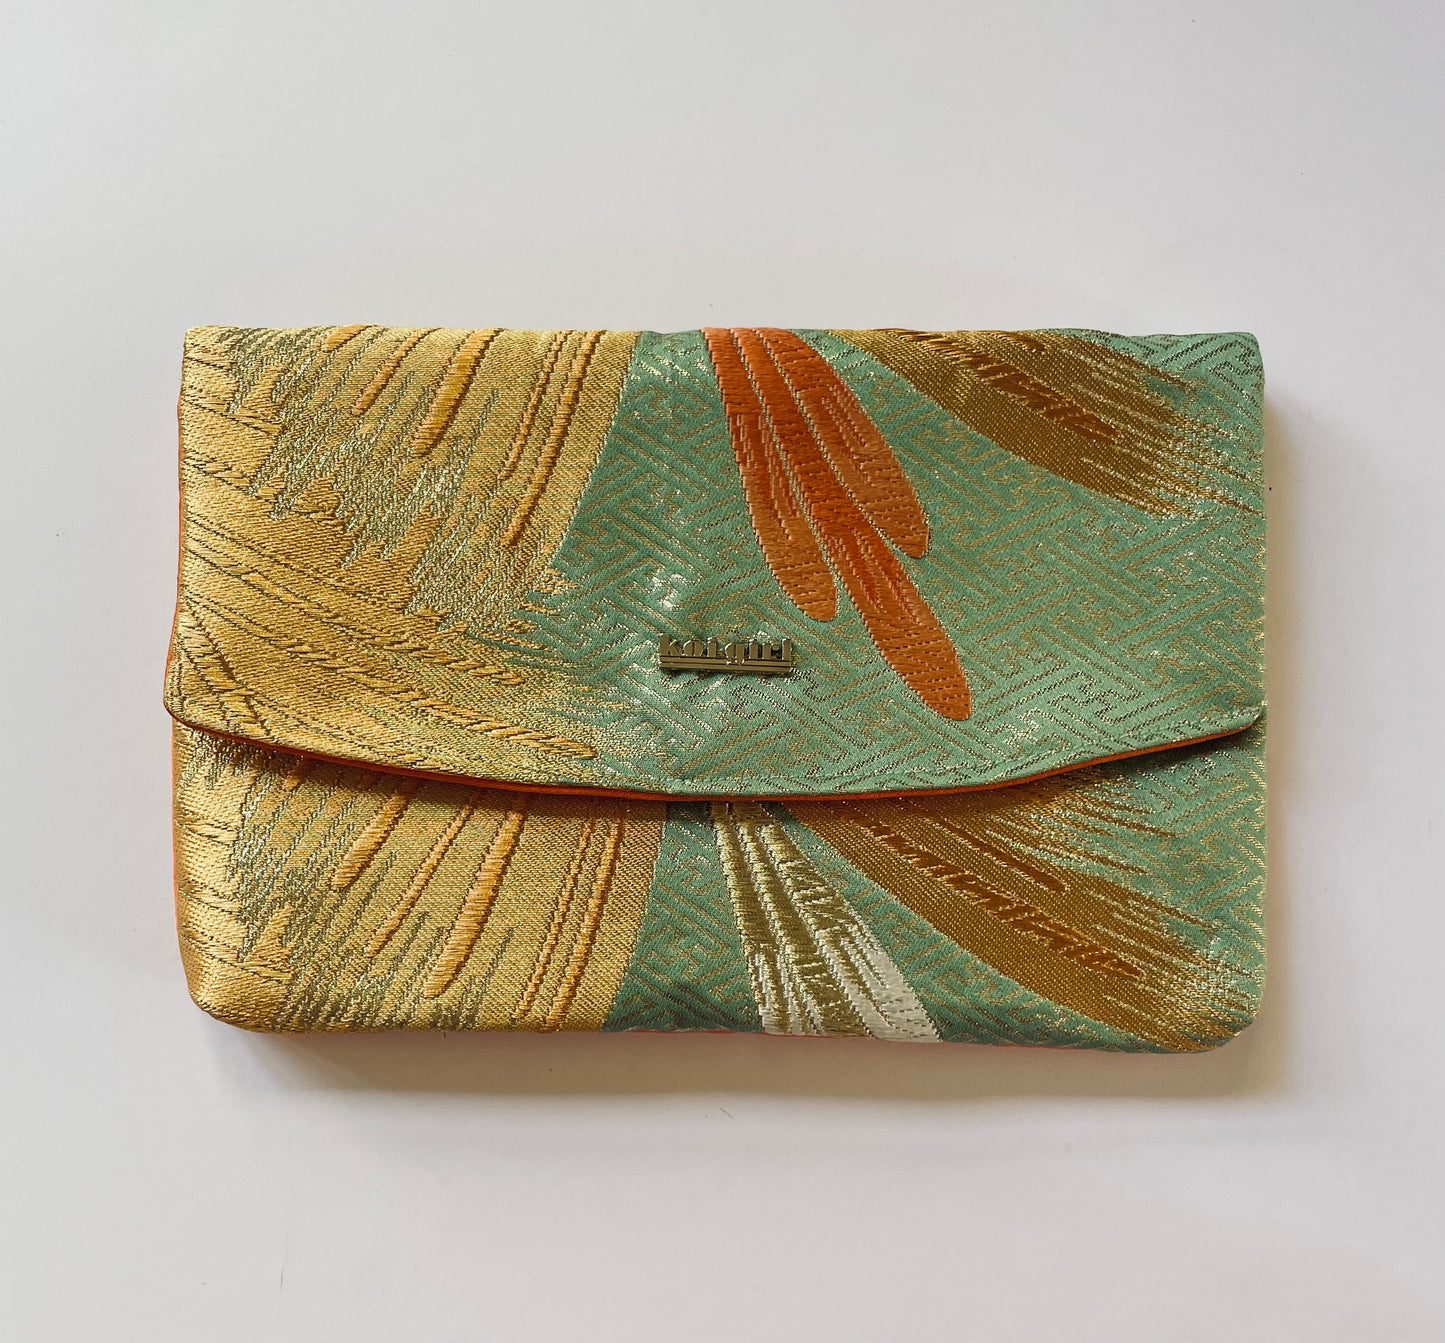 Turquoise and Gold Clutch